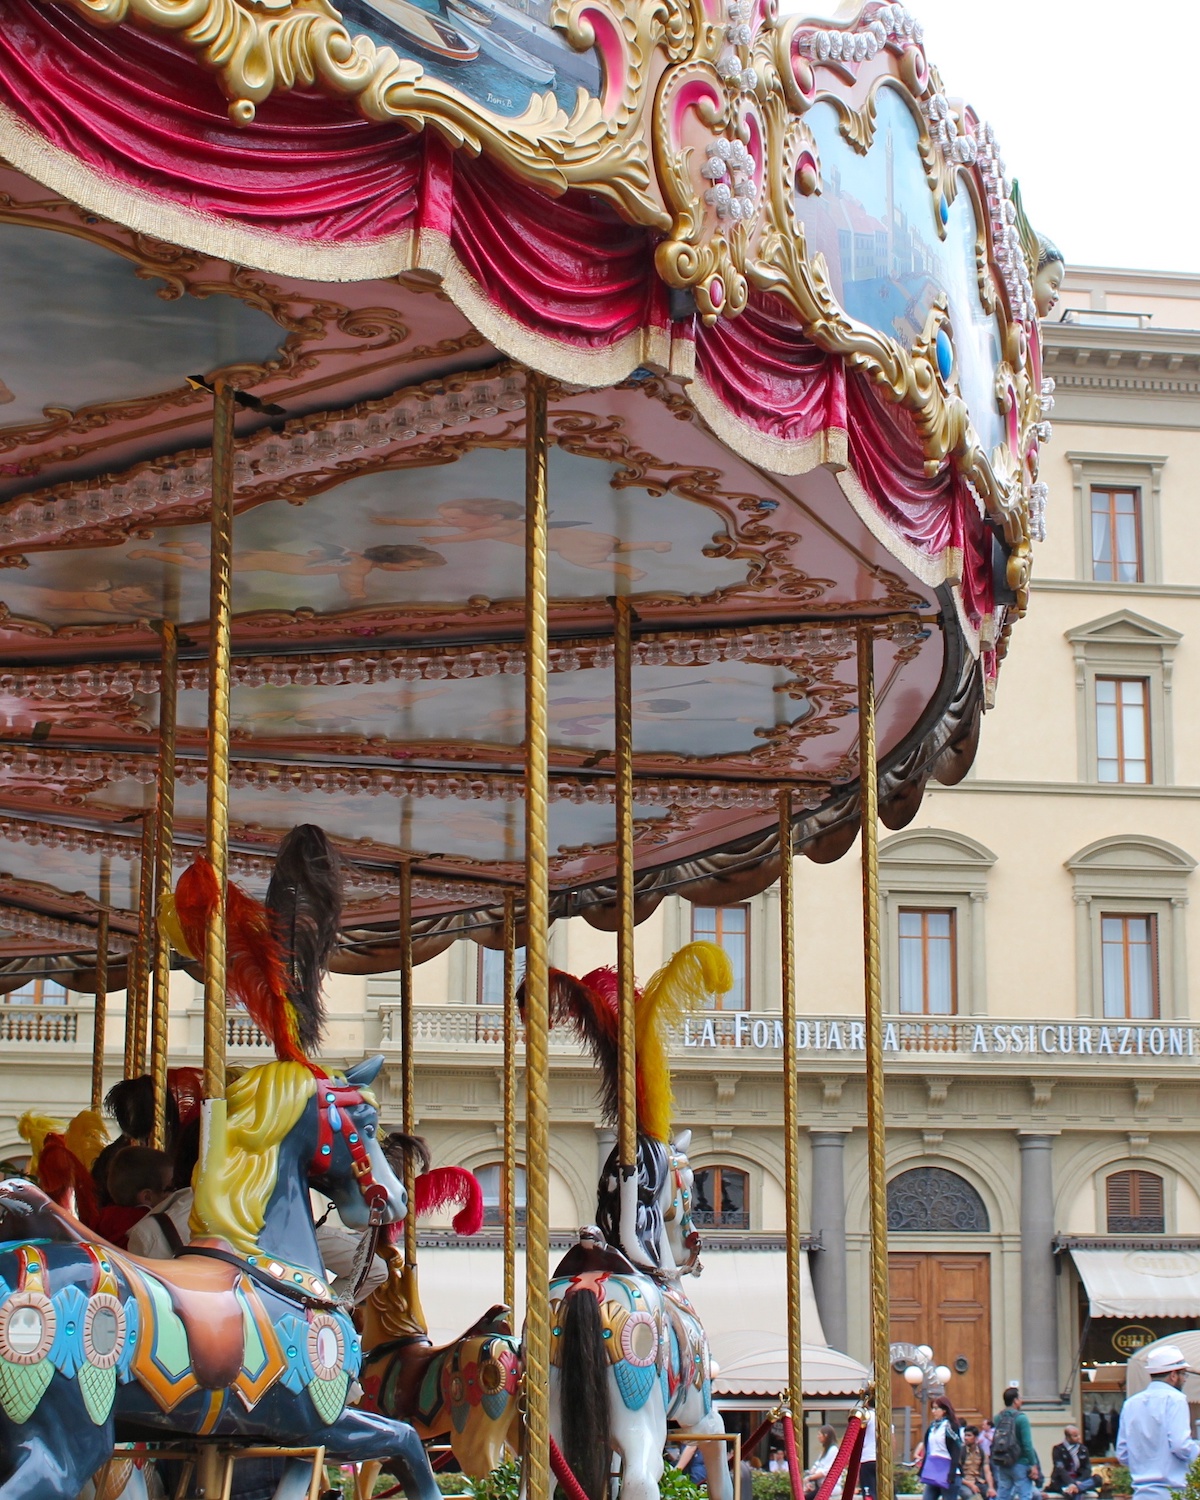 Colorful kids' carousel in Florence, Italy